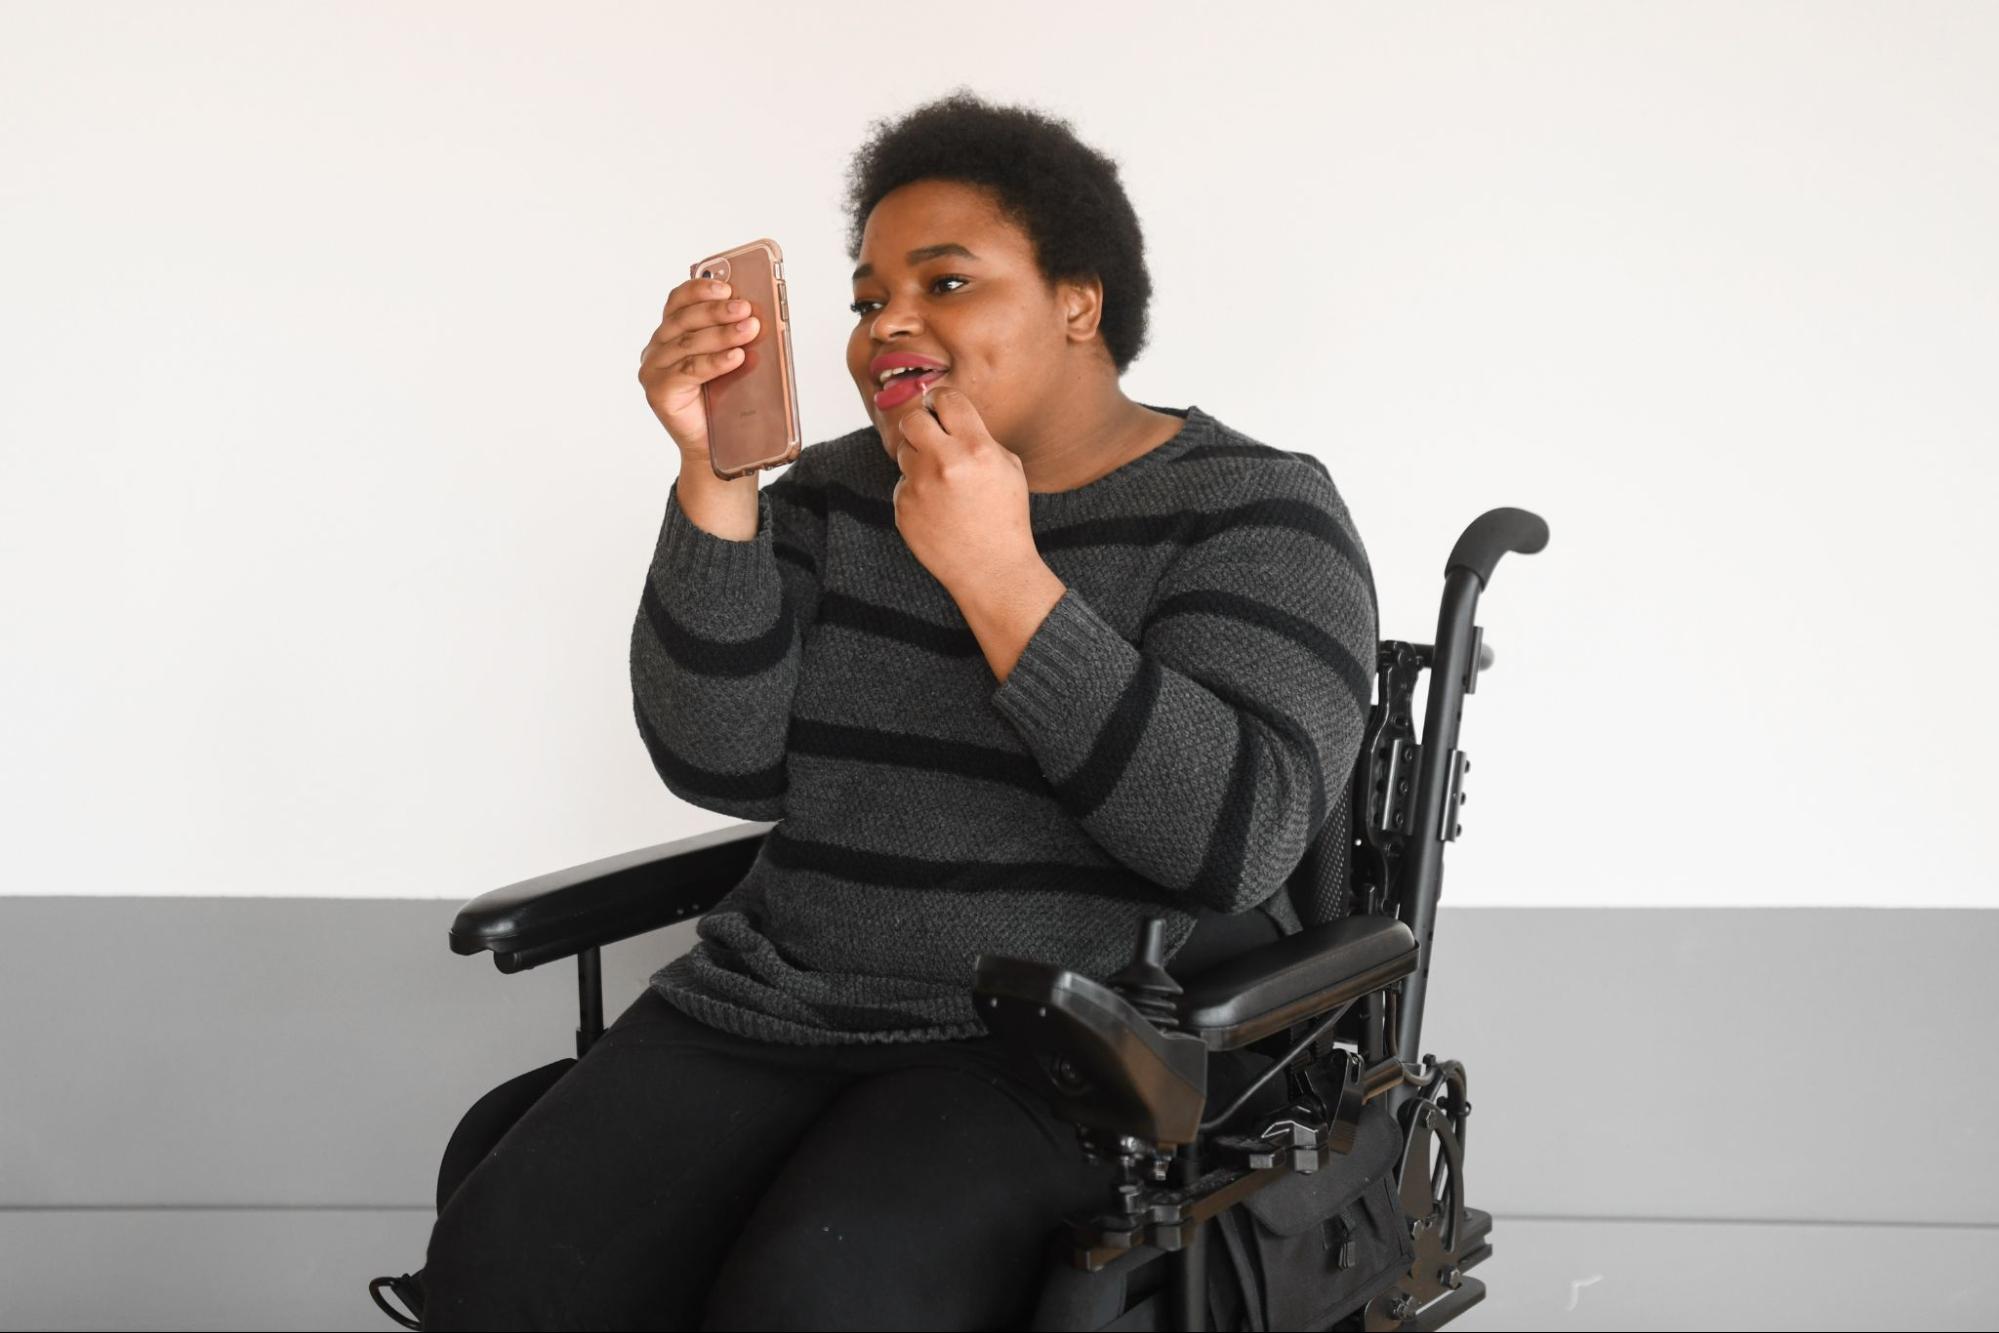 Torso crop of a Black non-binary person applying pink lip gloss by using their pink cell phone as a mirror. They are sitting in a power wheelchair and in front of a white wall with a gray stripe.